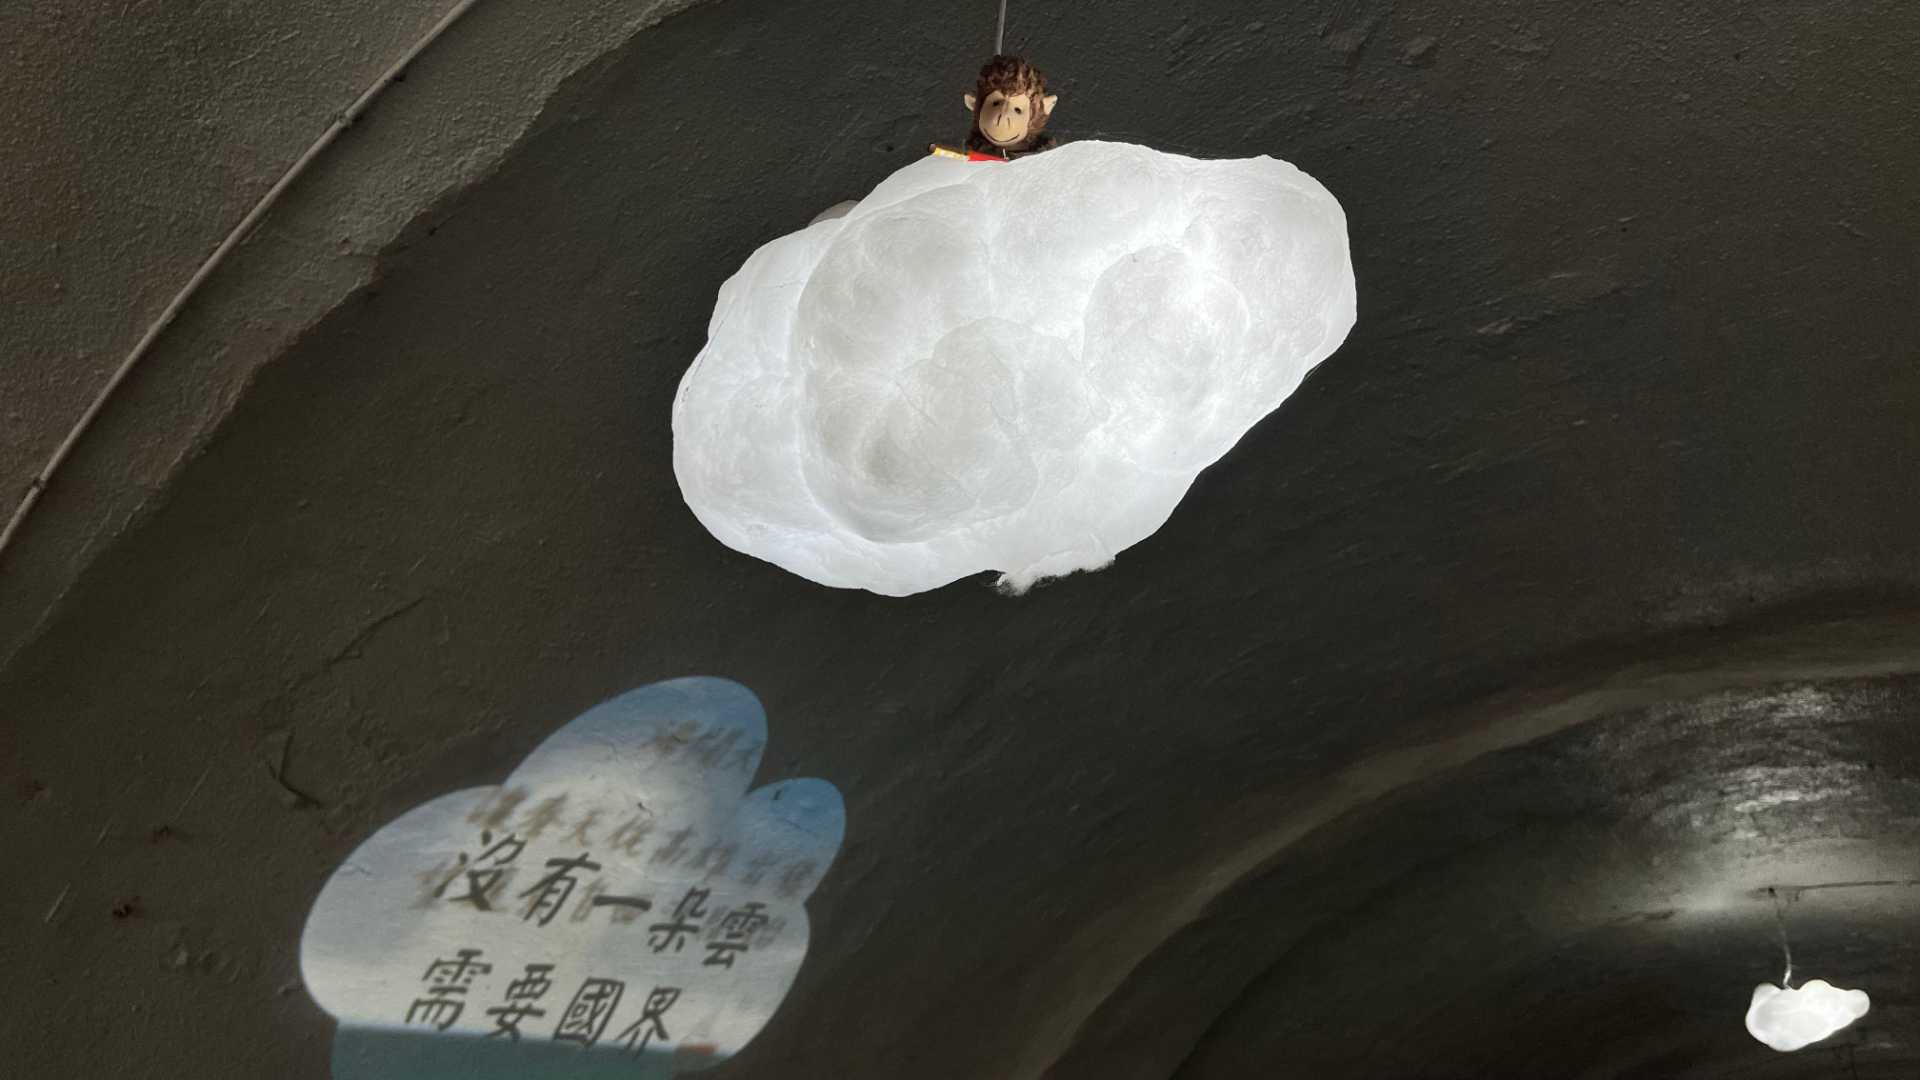 A sculpture of a monkey riding a cloud hangs from the ceiling. A cloud-shaped video of Chinese characters is projected on the tunnel wall.